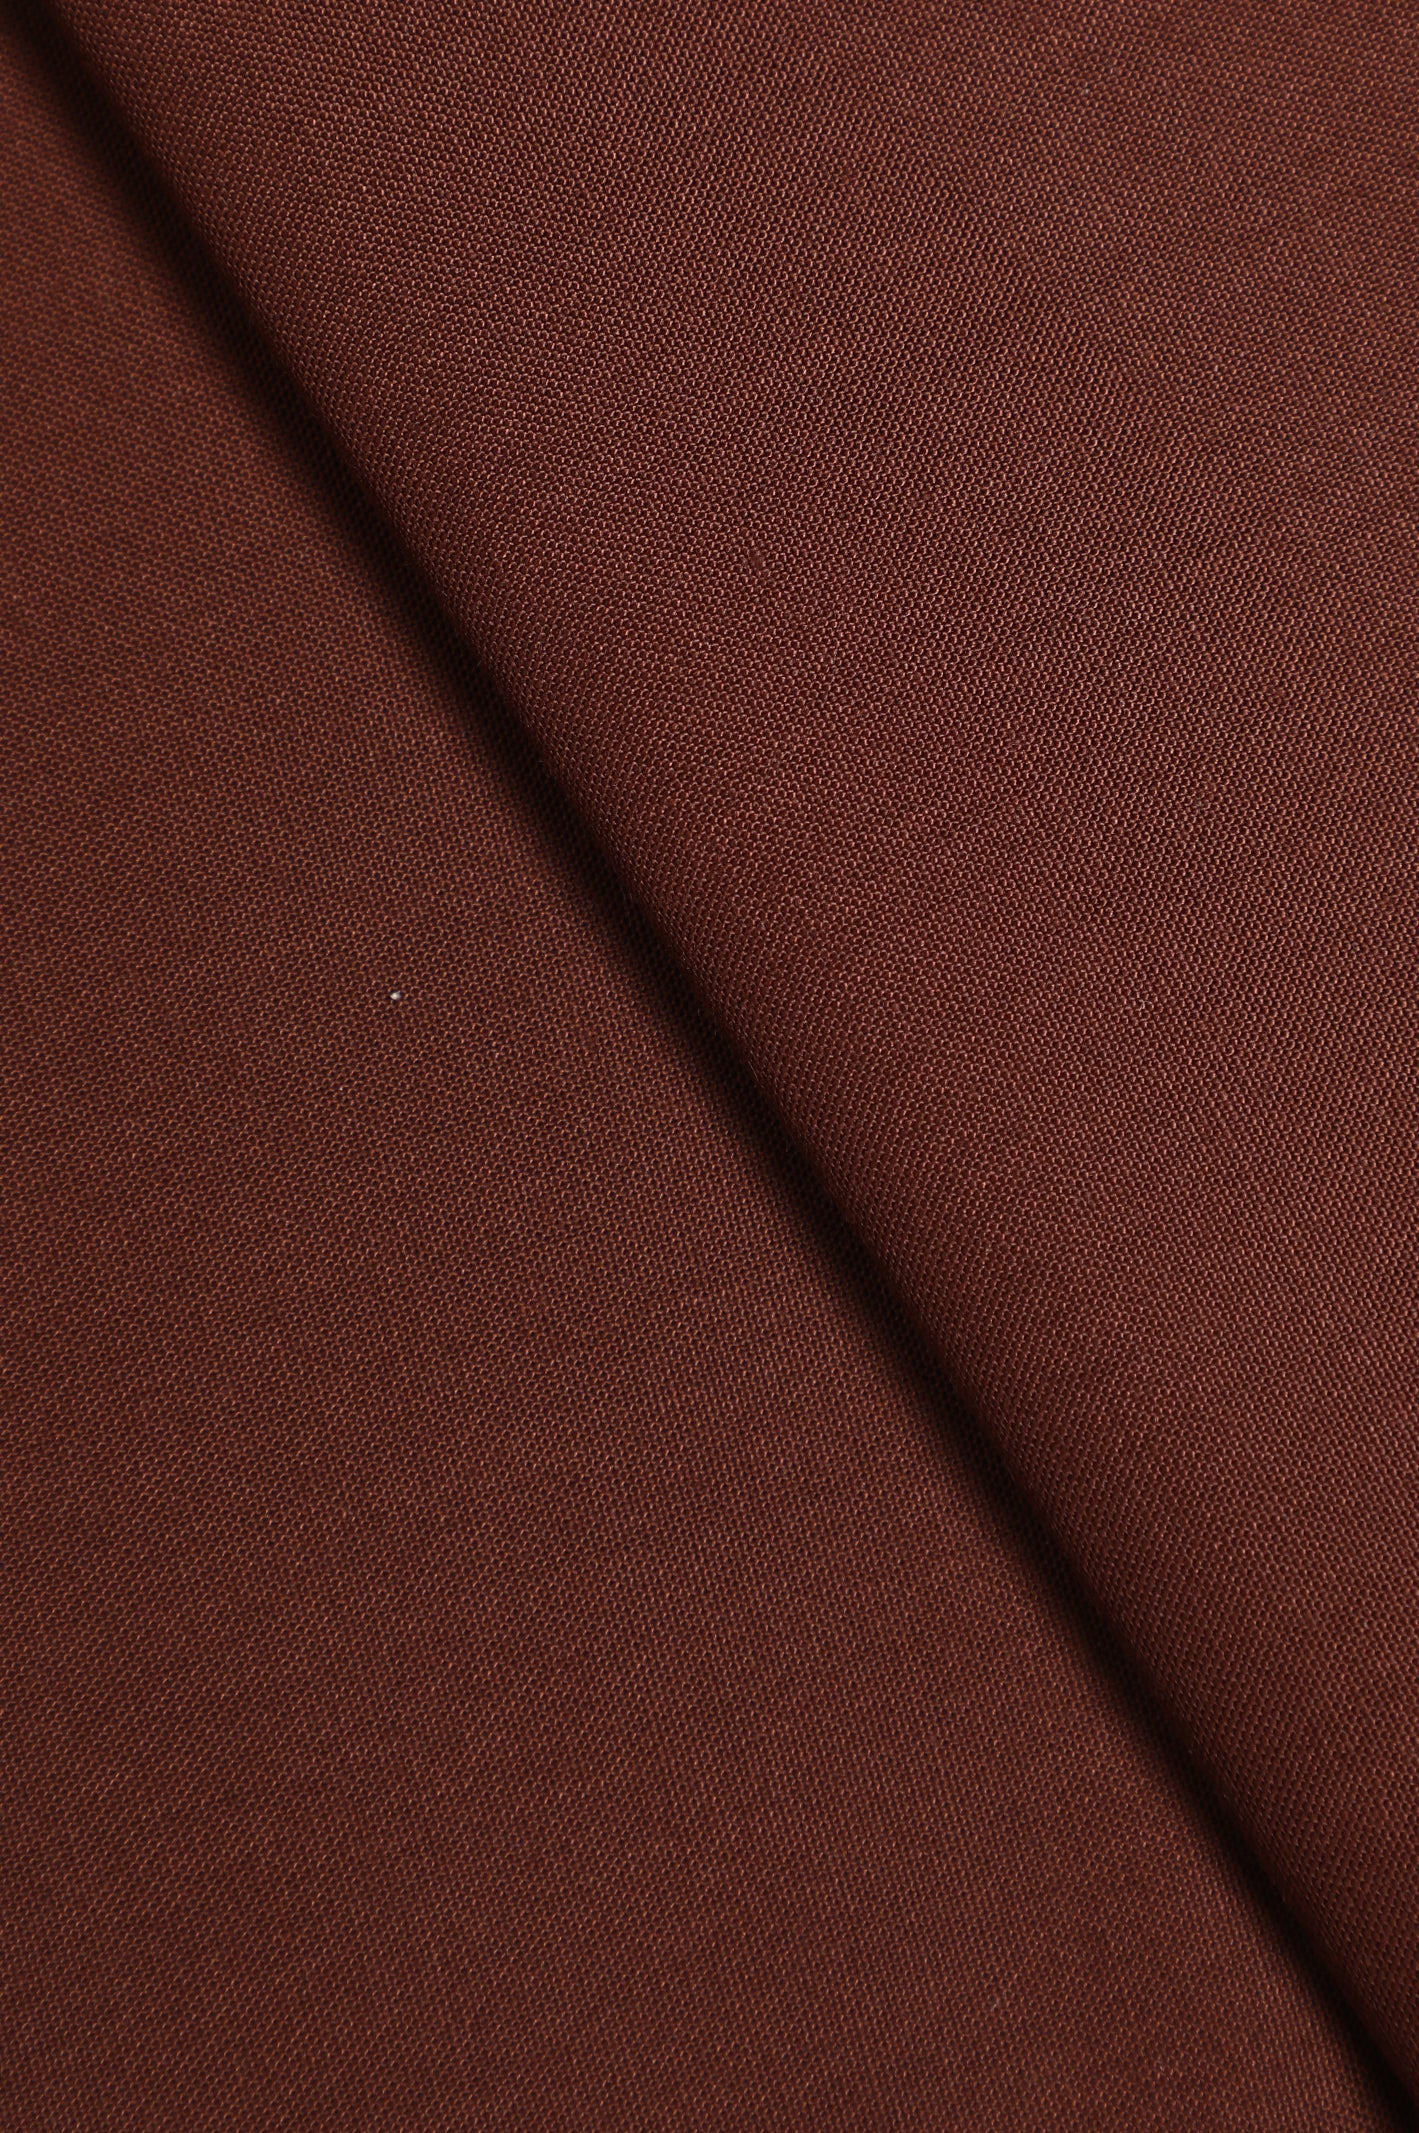 Unstitched Fabric for Men SKU: US0224-D-BROWN - Diners